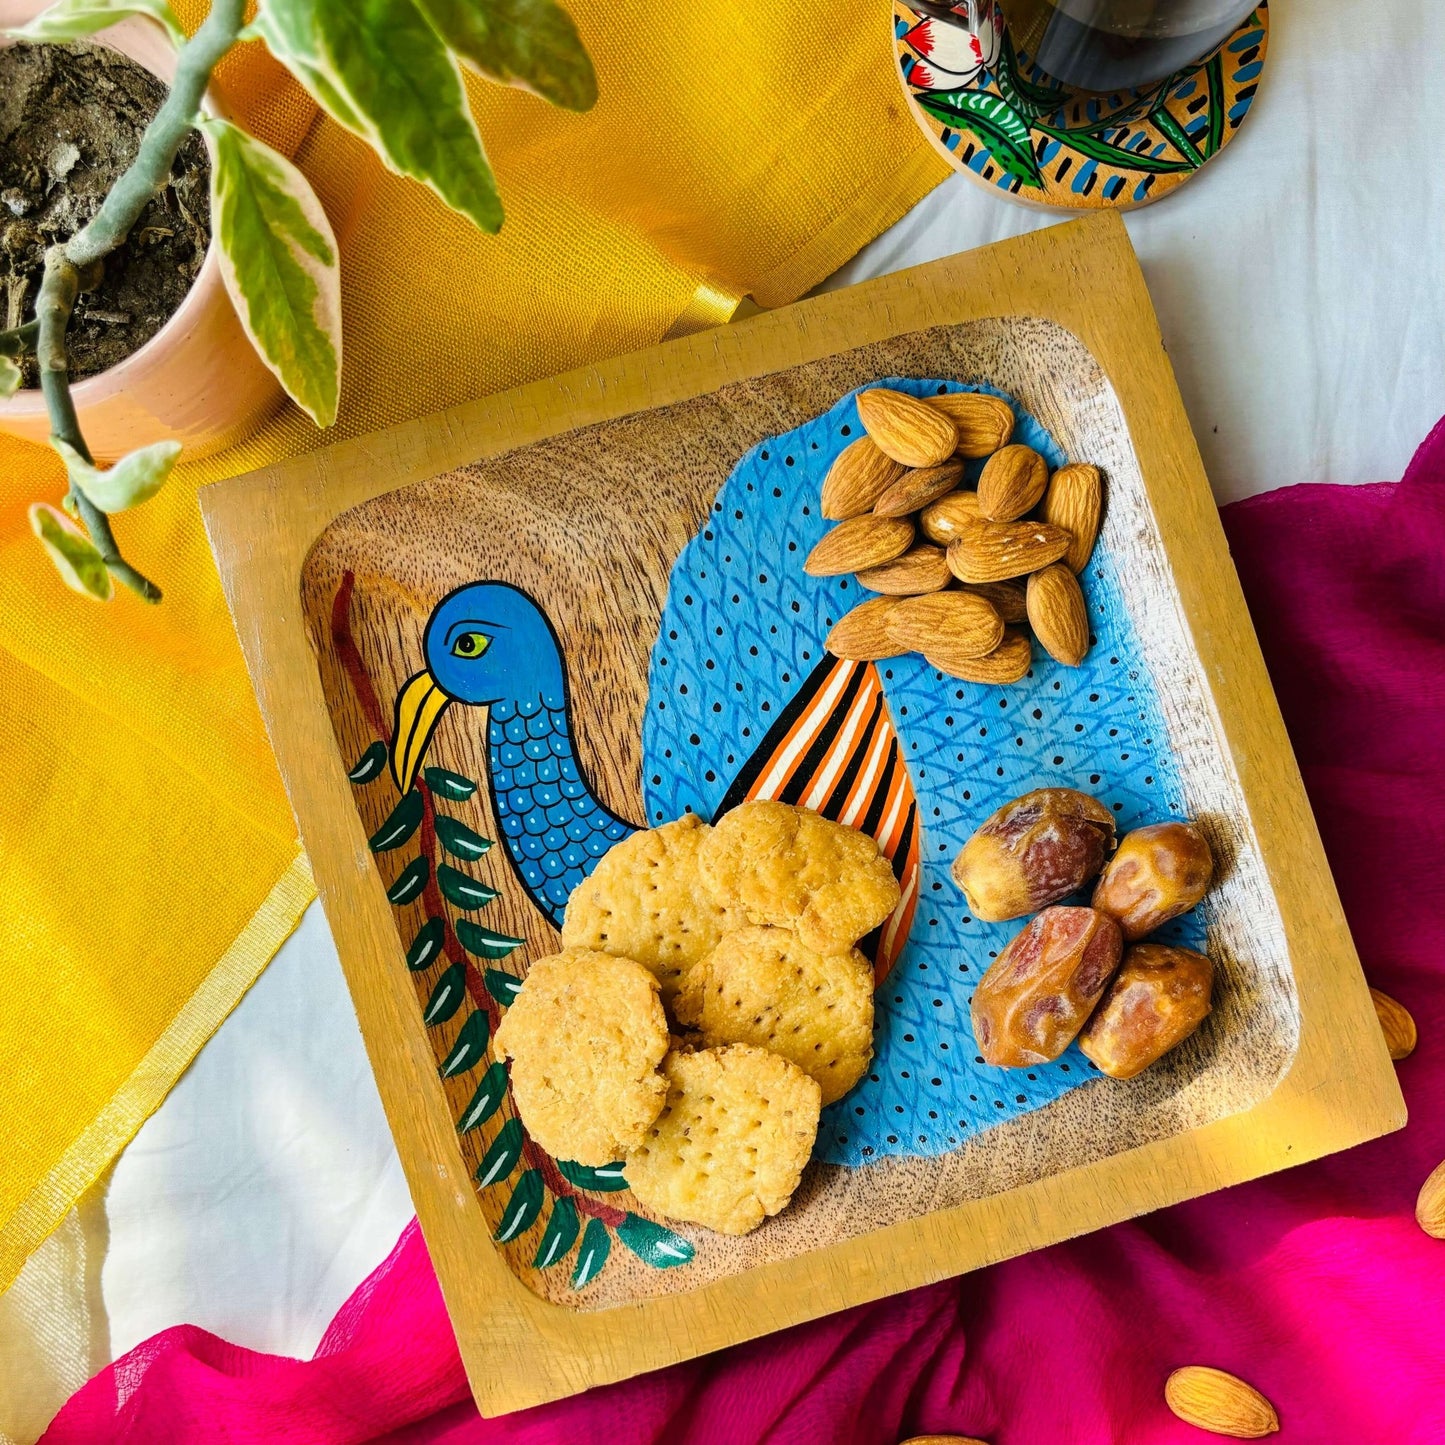 Biscuits, dates and almonds are served in a handcrafted mango wood square wood tray or a trinket tray, painted with a peacock by generational Pattachitra artists